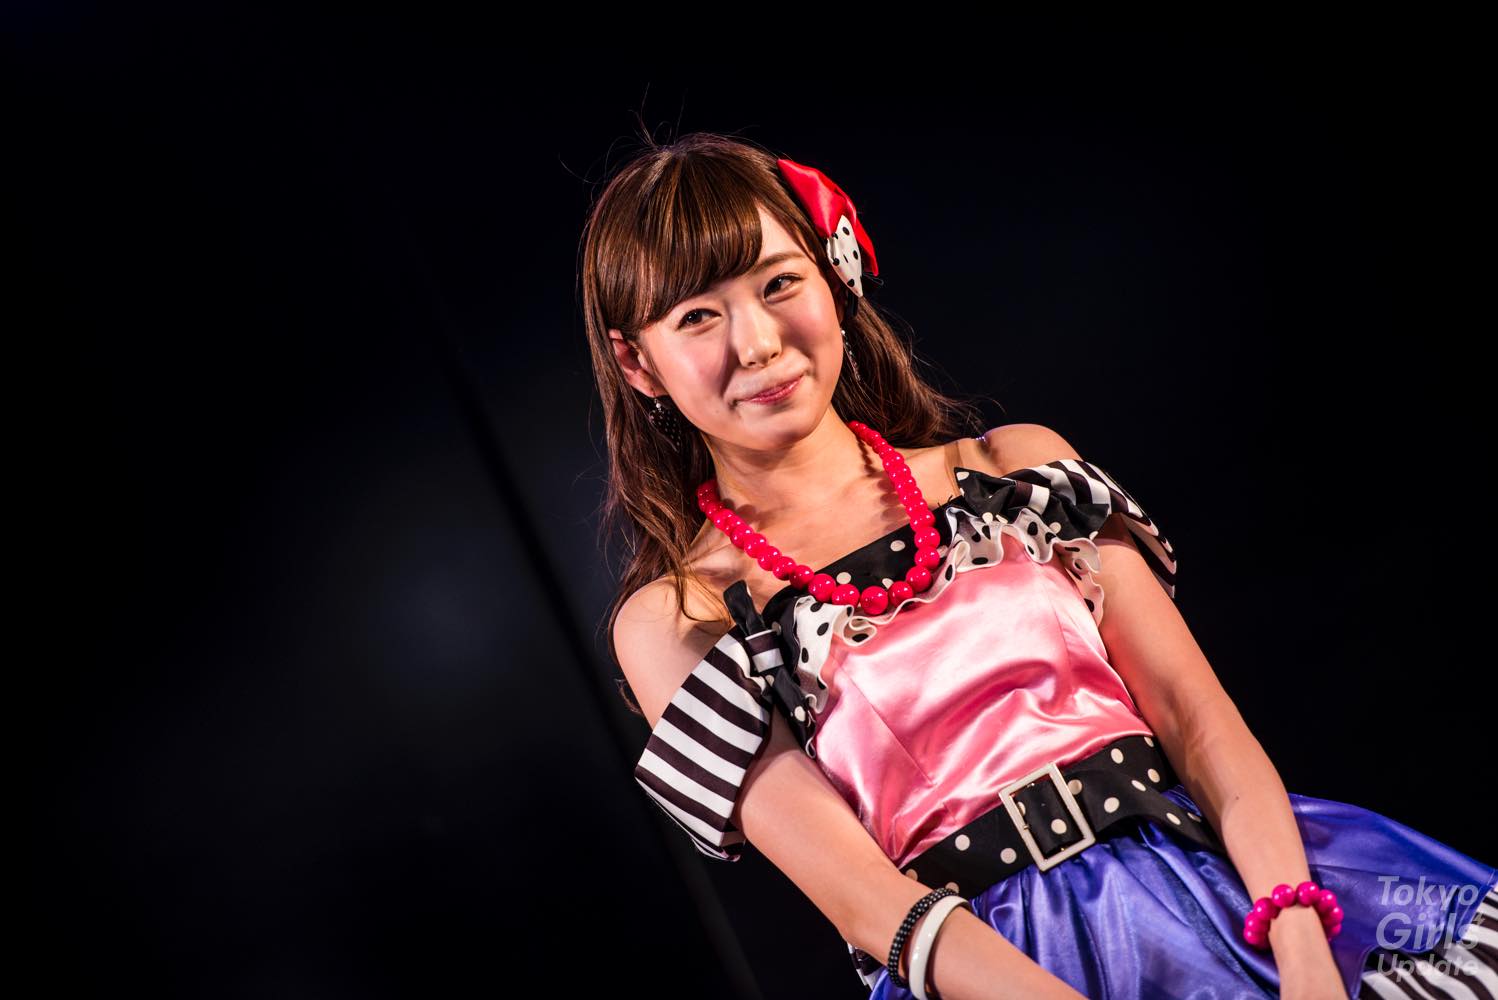 Keep Smile Alive! The Dates of Graduation Concerts for Miyuki Watanabe Finally Announced